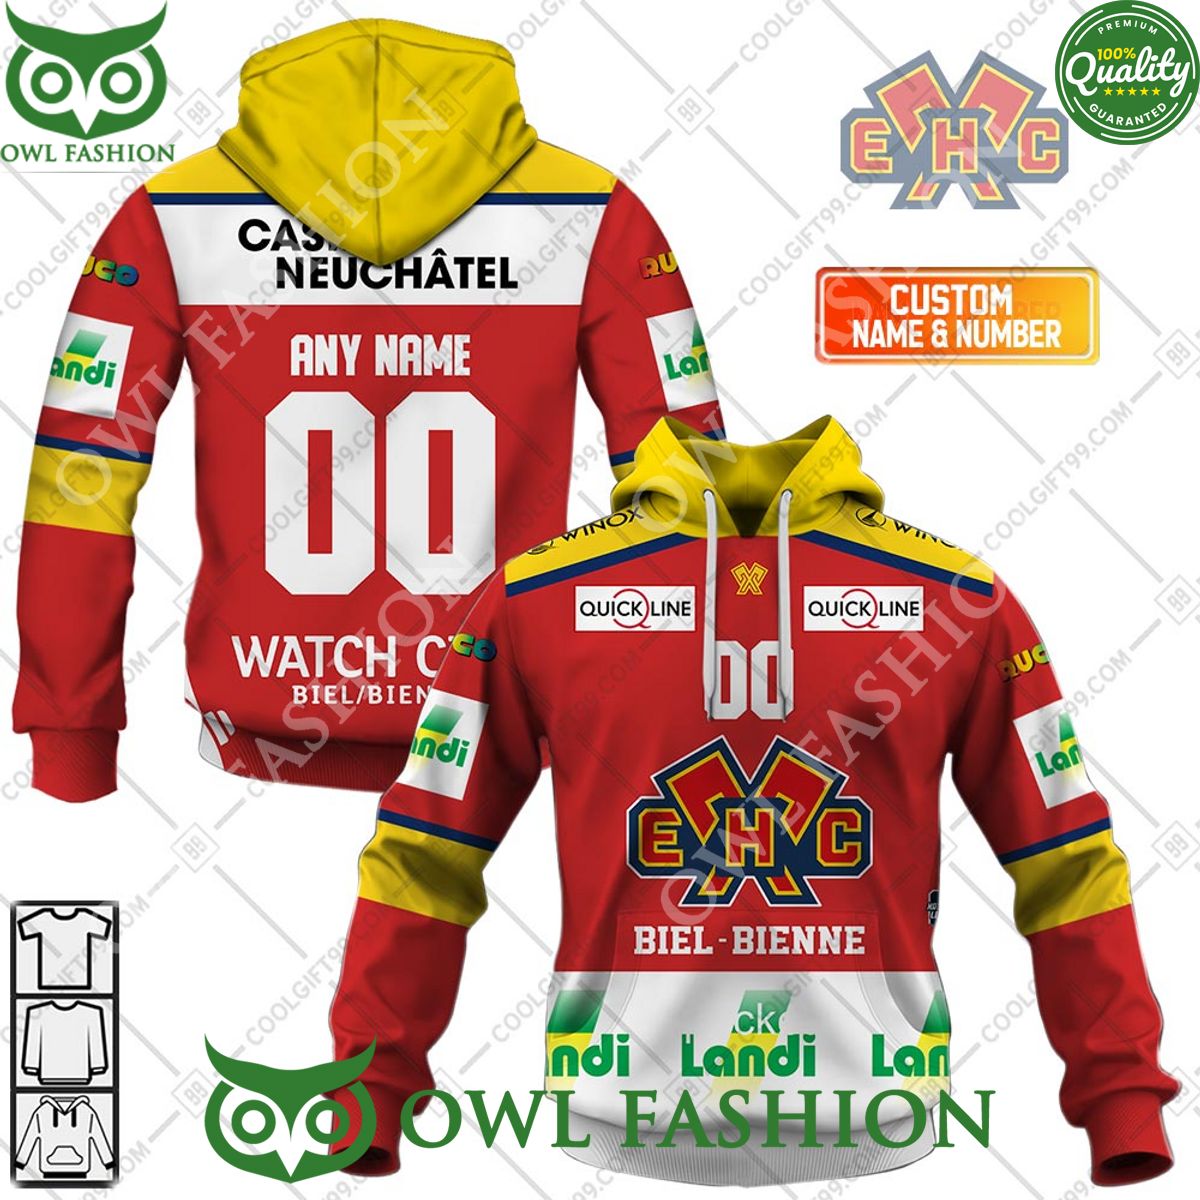 personalized name and number nl hockey ehc biel home jersey style printed hoodie shirt 1 1zgSW.jpg